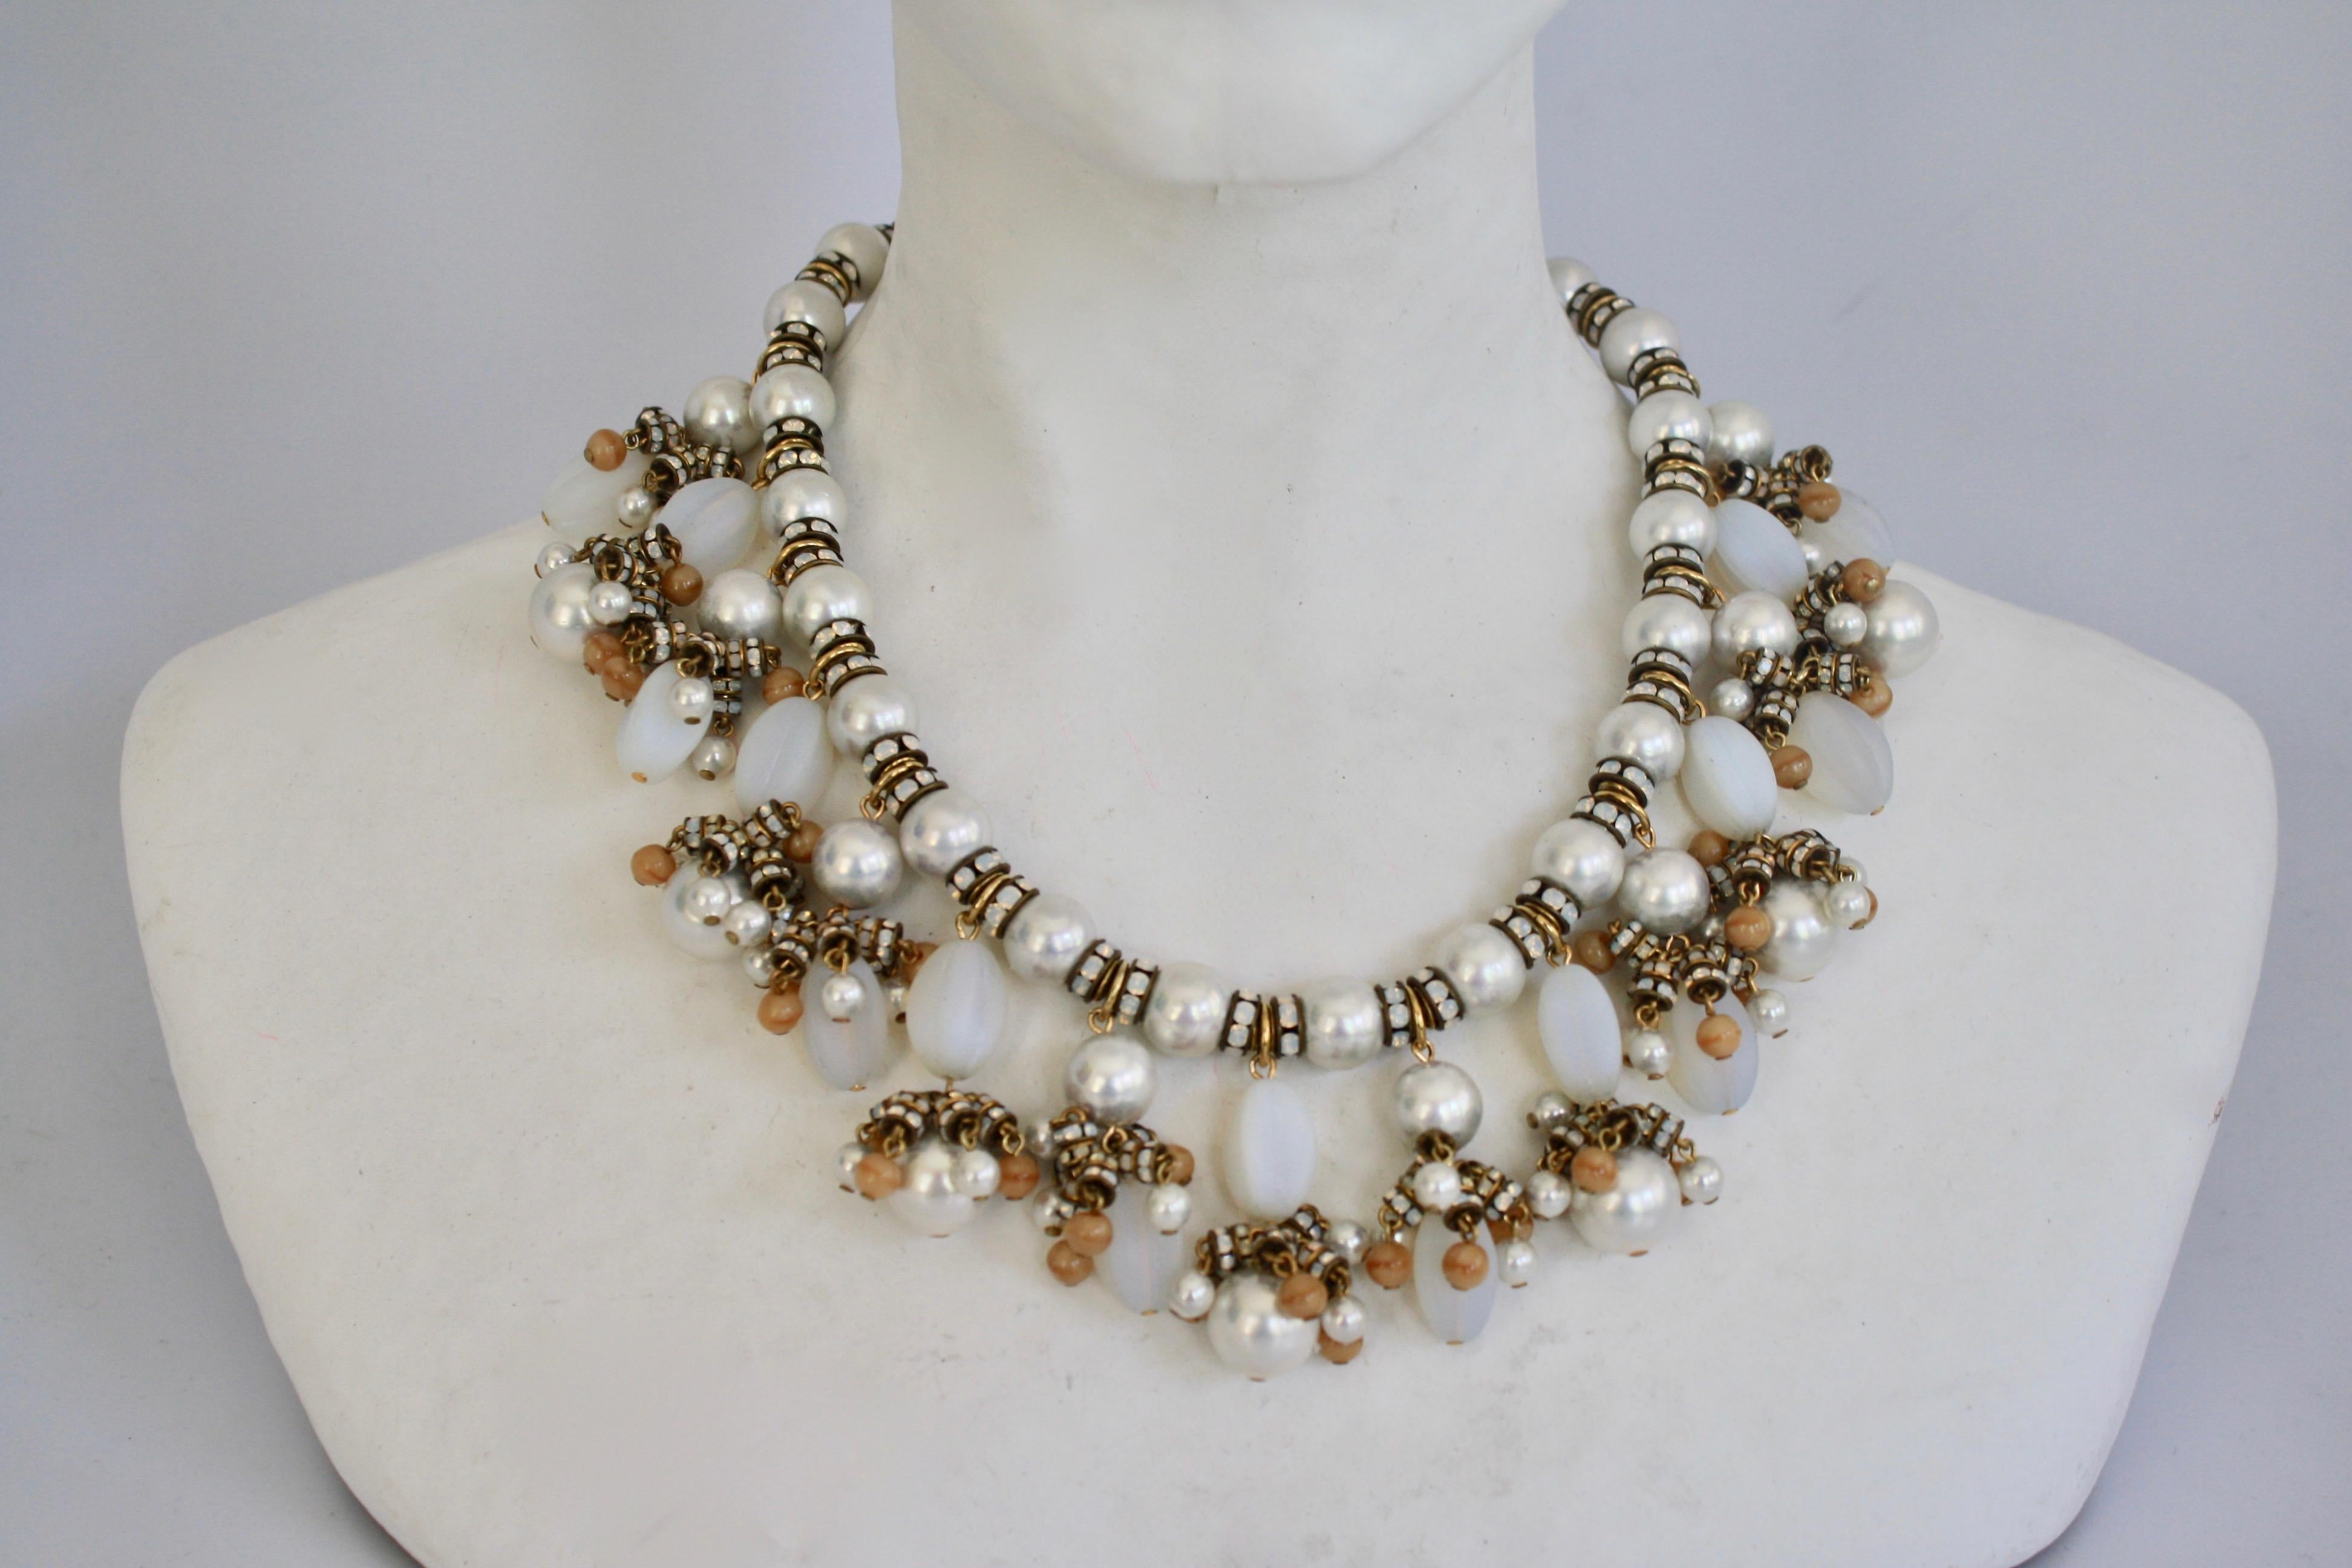 Elegant glass pearl and Swarovski crystal rondelle necklace with opaline and glass drops from Francoise Montague Paris. 